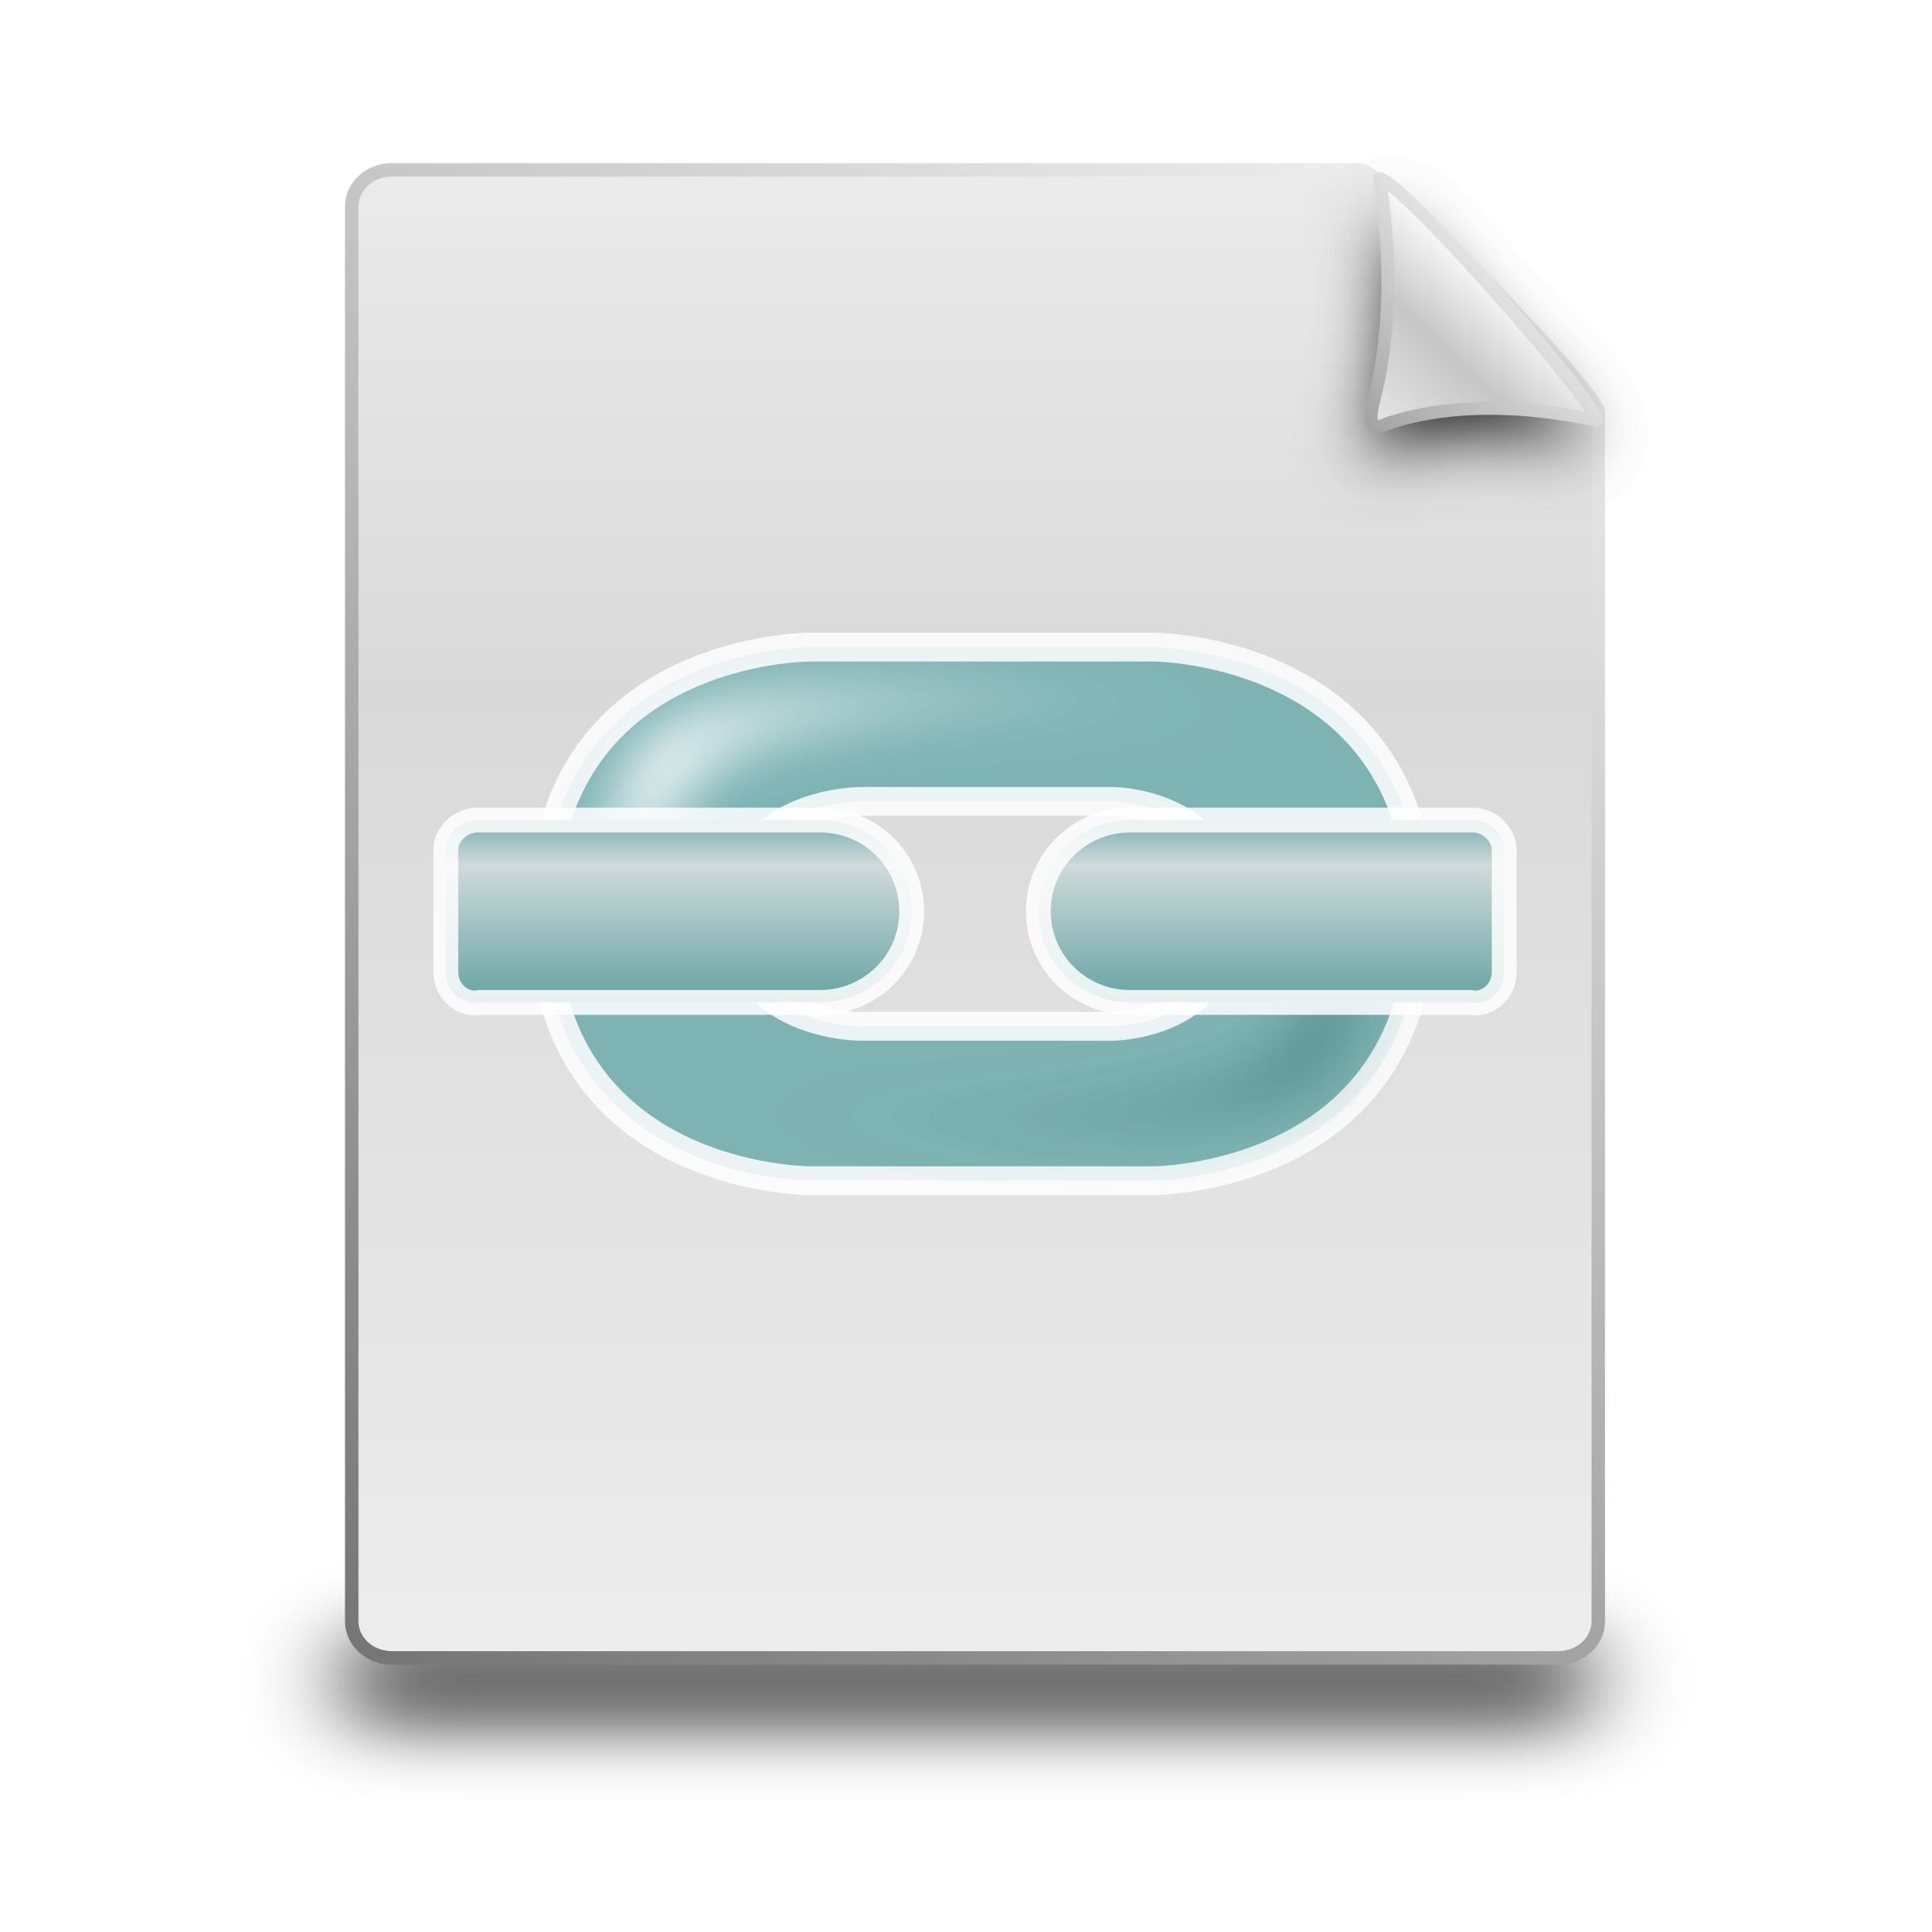 File link icon icons